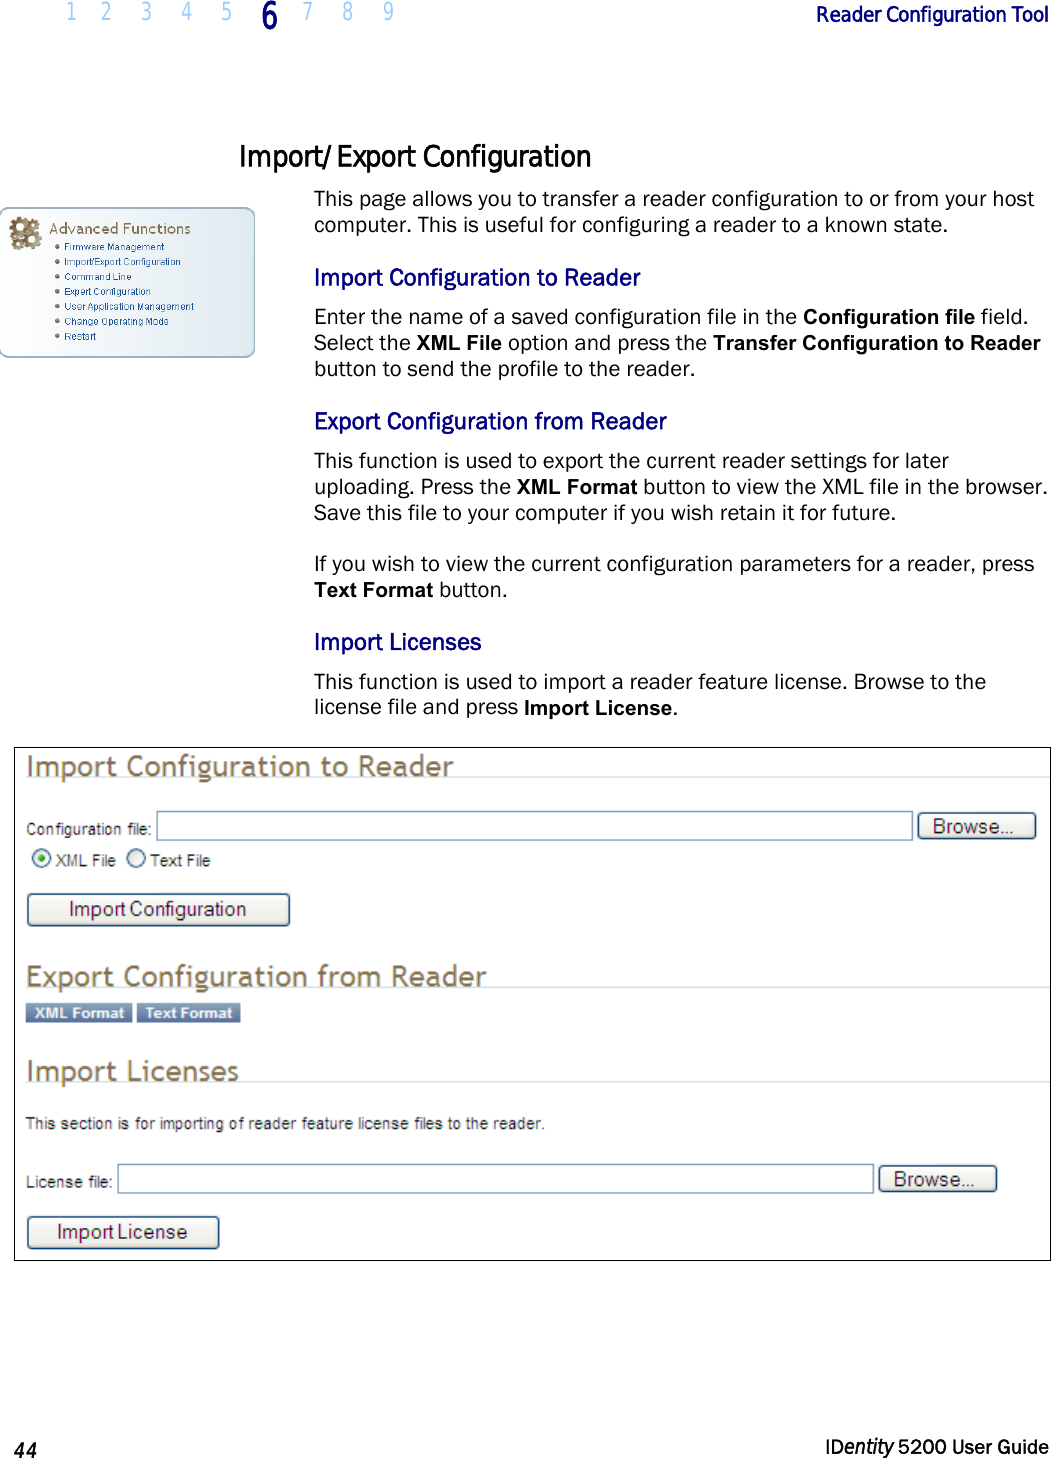  1 2  3  4  5 6 7 8 9       Reader Configuration Tool   44  IDentity 5200 User Guide  Import/Export Configuration  This page allows you to transfer a reader configuration to or from your host computer. This is useful for configuring a reader to a known state.  Import Configuration to Reader Enter the name of a saved configuration file in the Configuration file field. Select the XML File option and press the Transfer Configuration to Reader button to send the profile to the reader.  Export Configuration from Reader This function is used to export the current reader settings for later uploading. Press the XML Format button to view the XML file in the browser. Save this file to your computer if you wish retain it for future. If you wish to view the current configuration parameters for a reader, press Text Format button. Import Licenses This function is used to import a reader feature license. Browse to the license file and press Import License.    